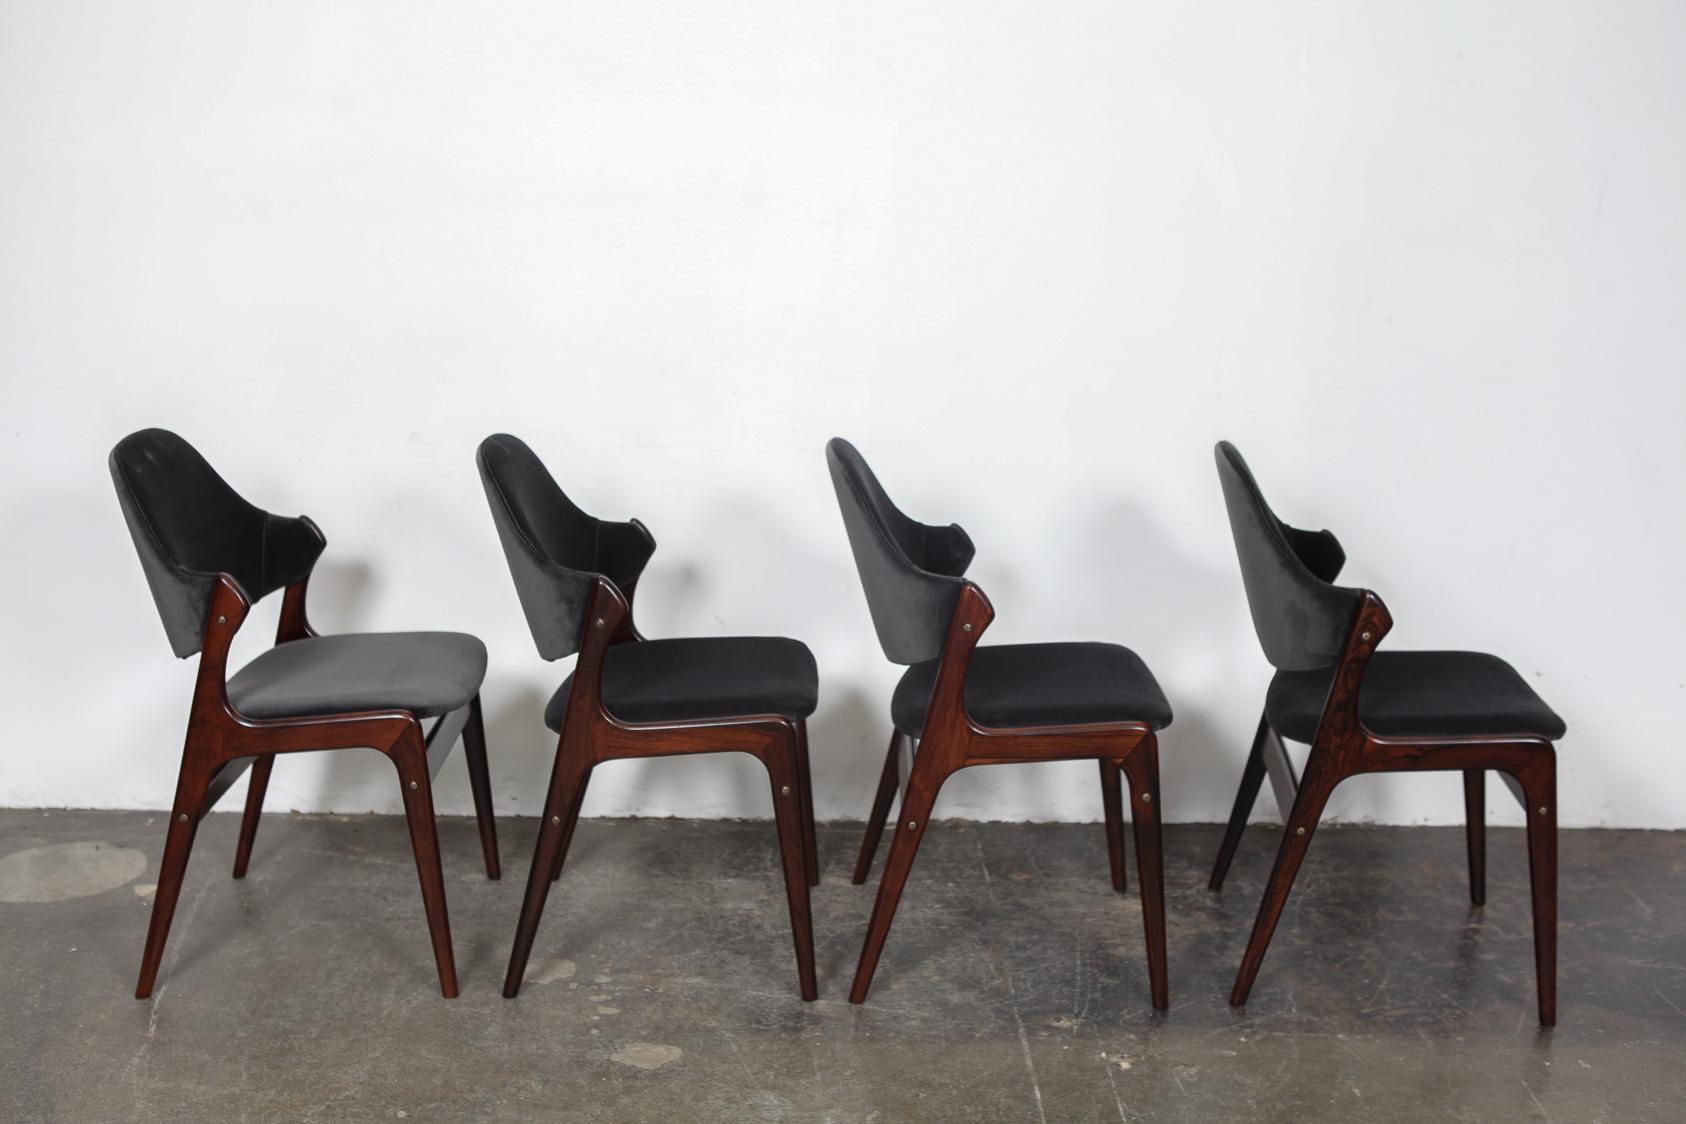 Set of 4 Danish solid rosewood dining chairs with curved upholstered back and seat, produced by Gern Mobelfabrik, 1960s. Newly refinished in lacquer and reupholstered in a grey mohair fabric.